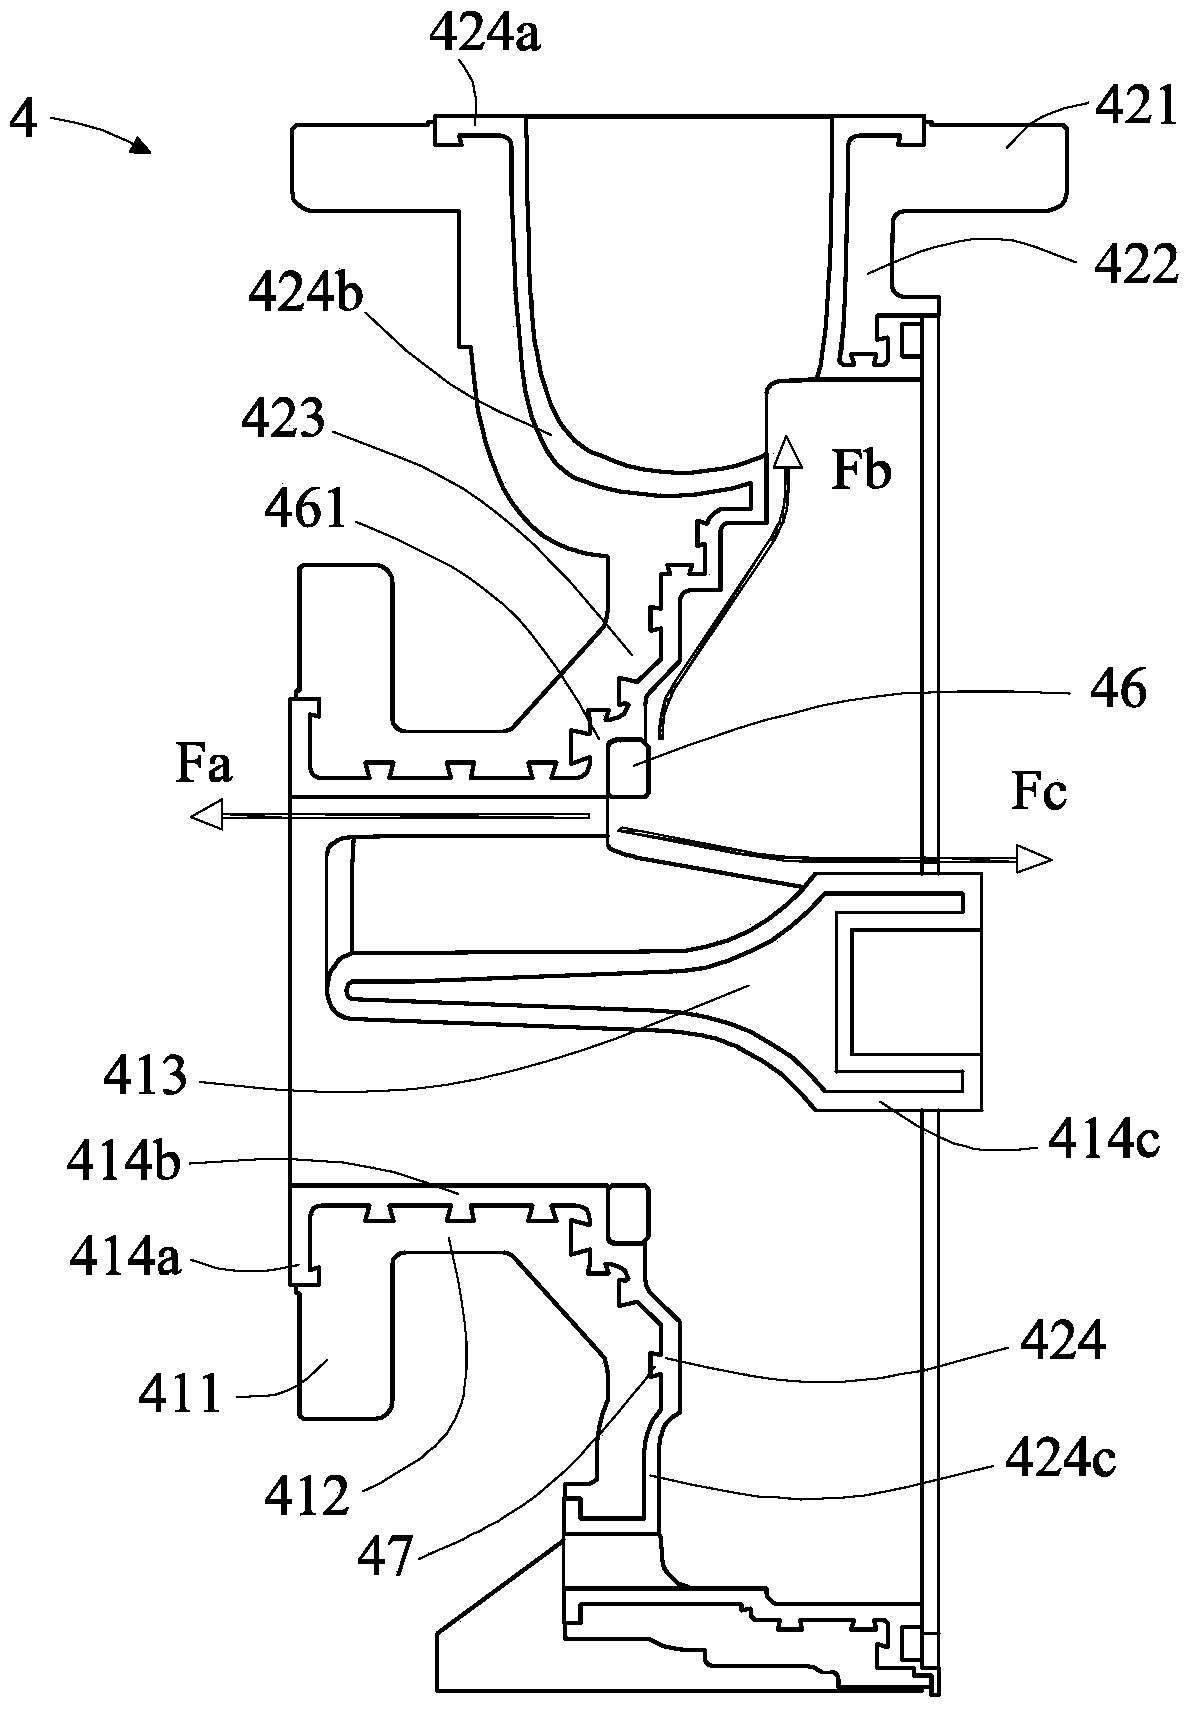 structure of pfa lined pump casing